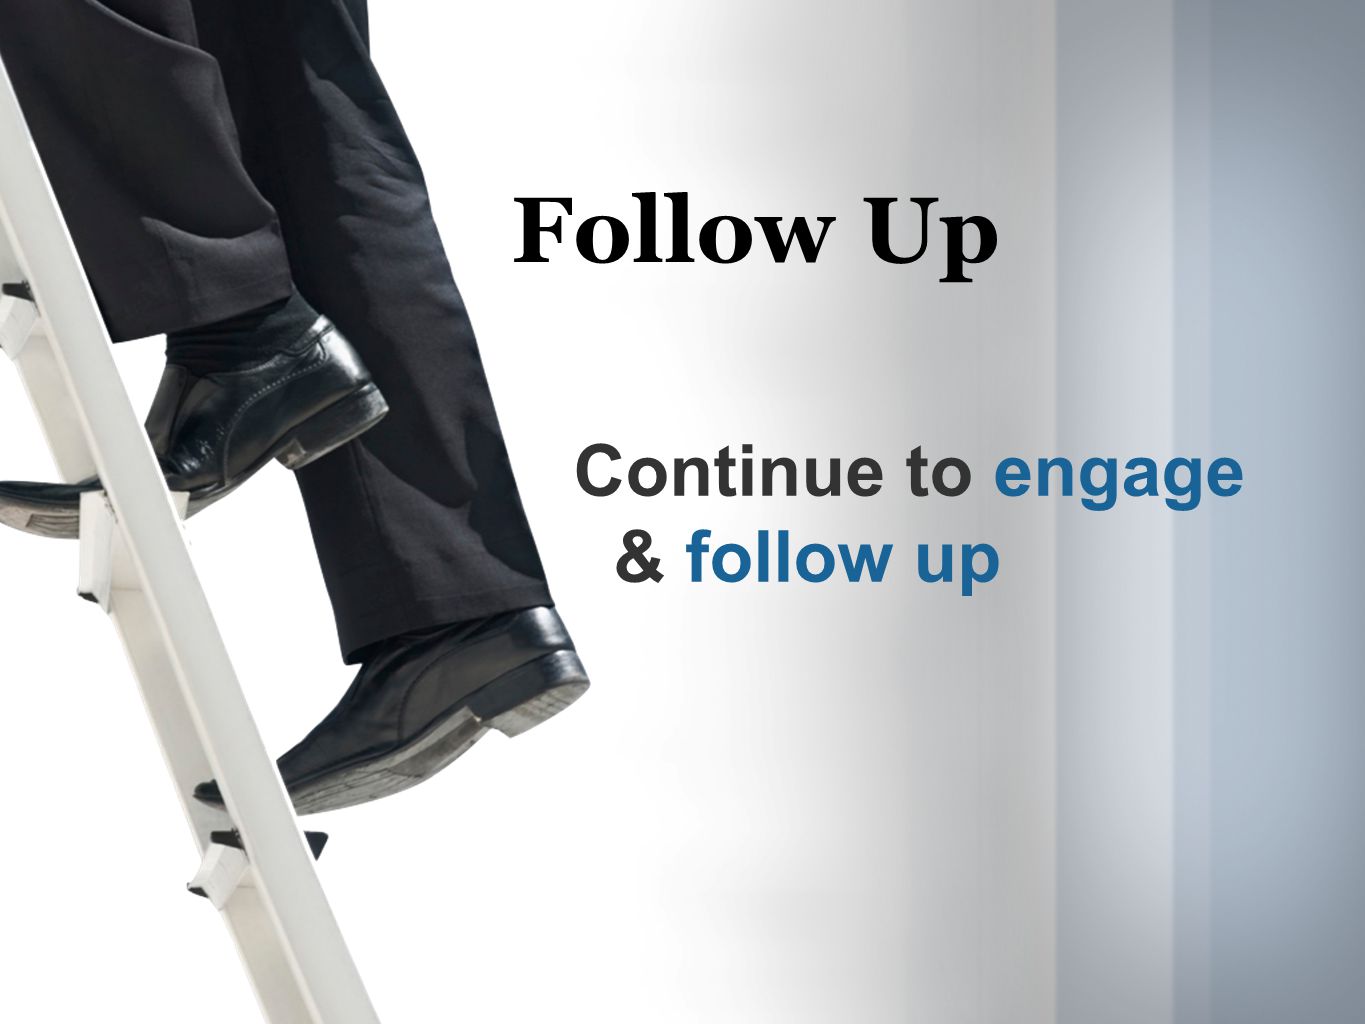 Follow Up Continue to engage & follow up